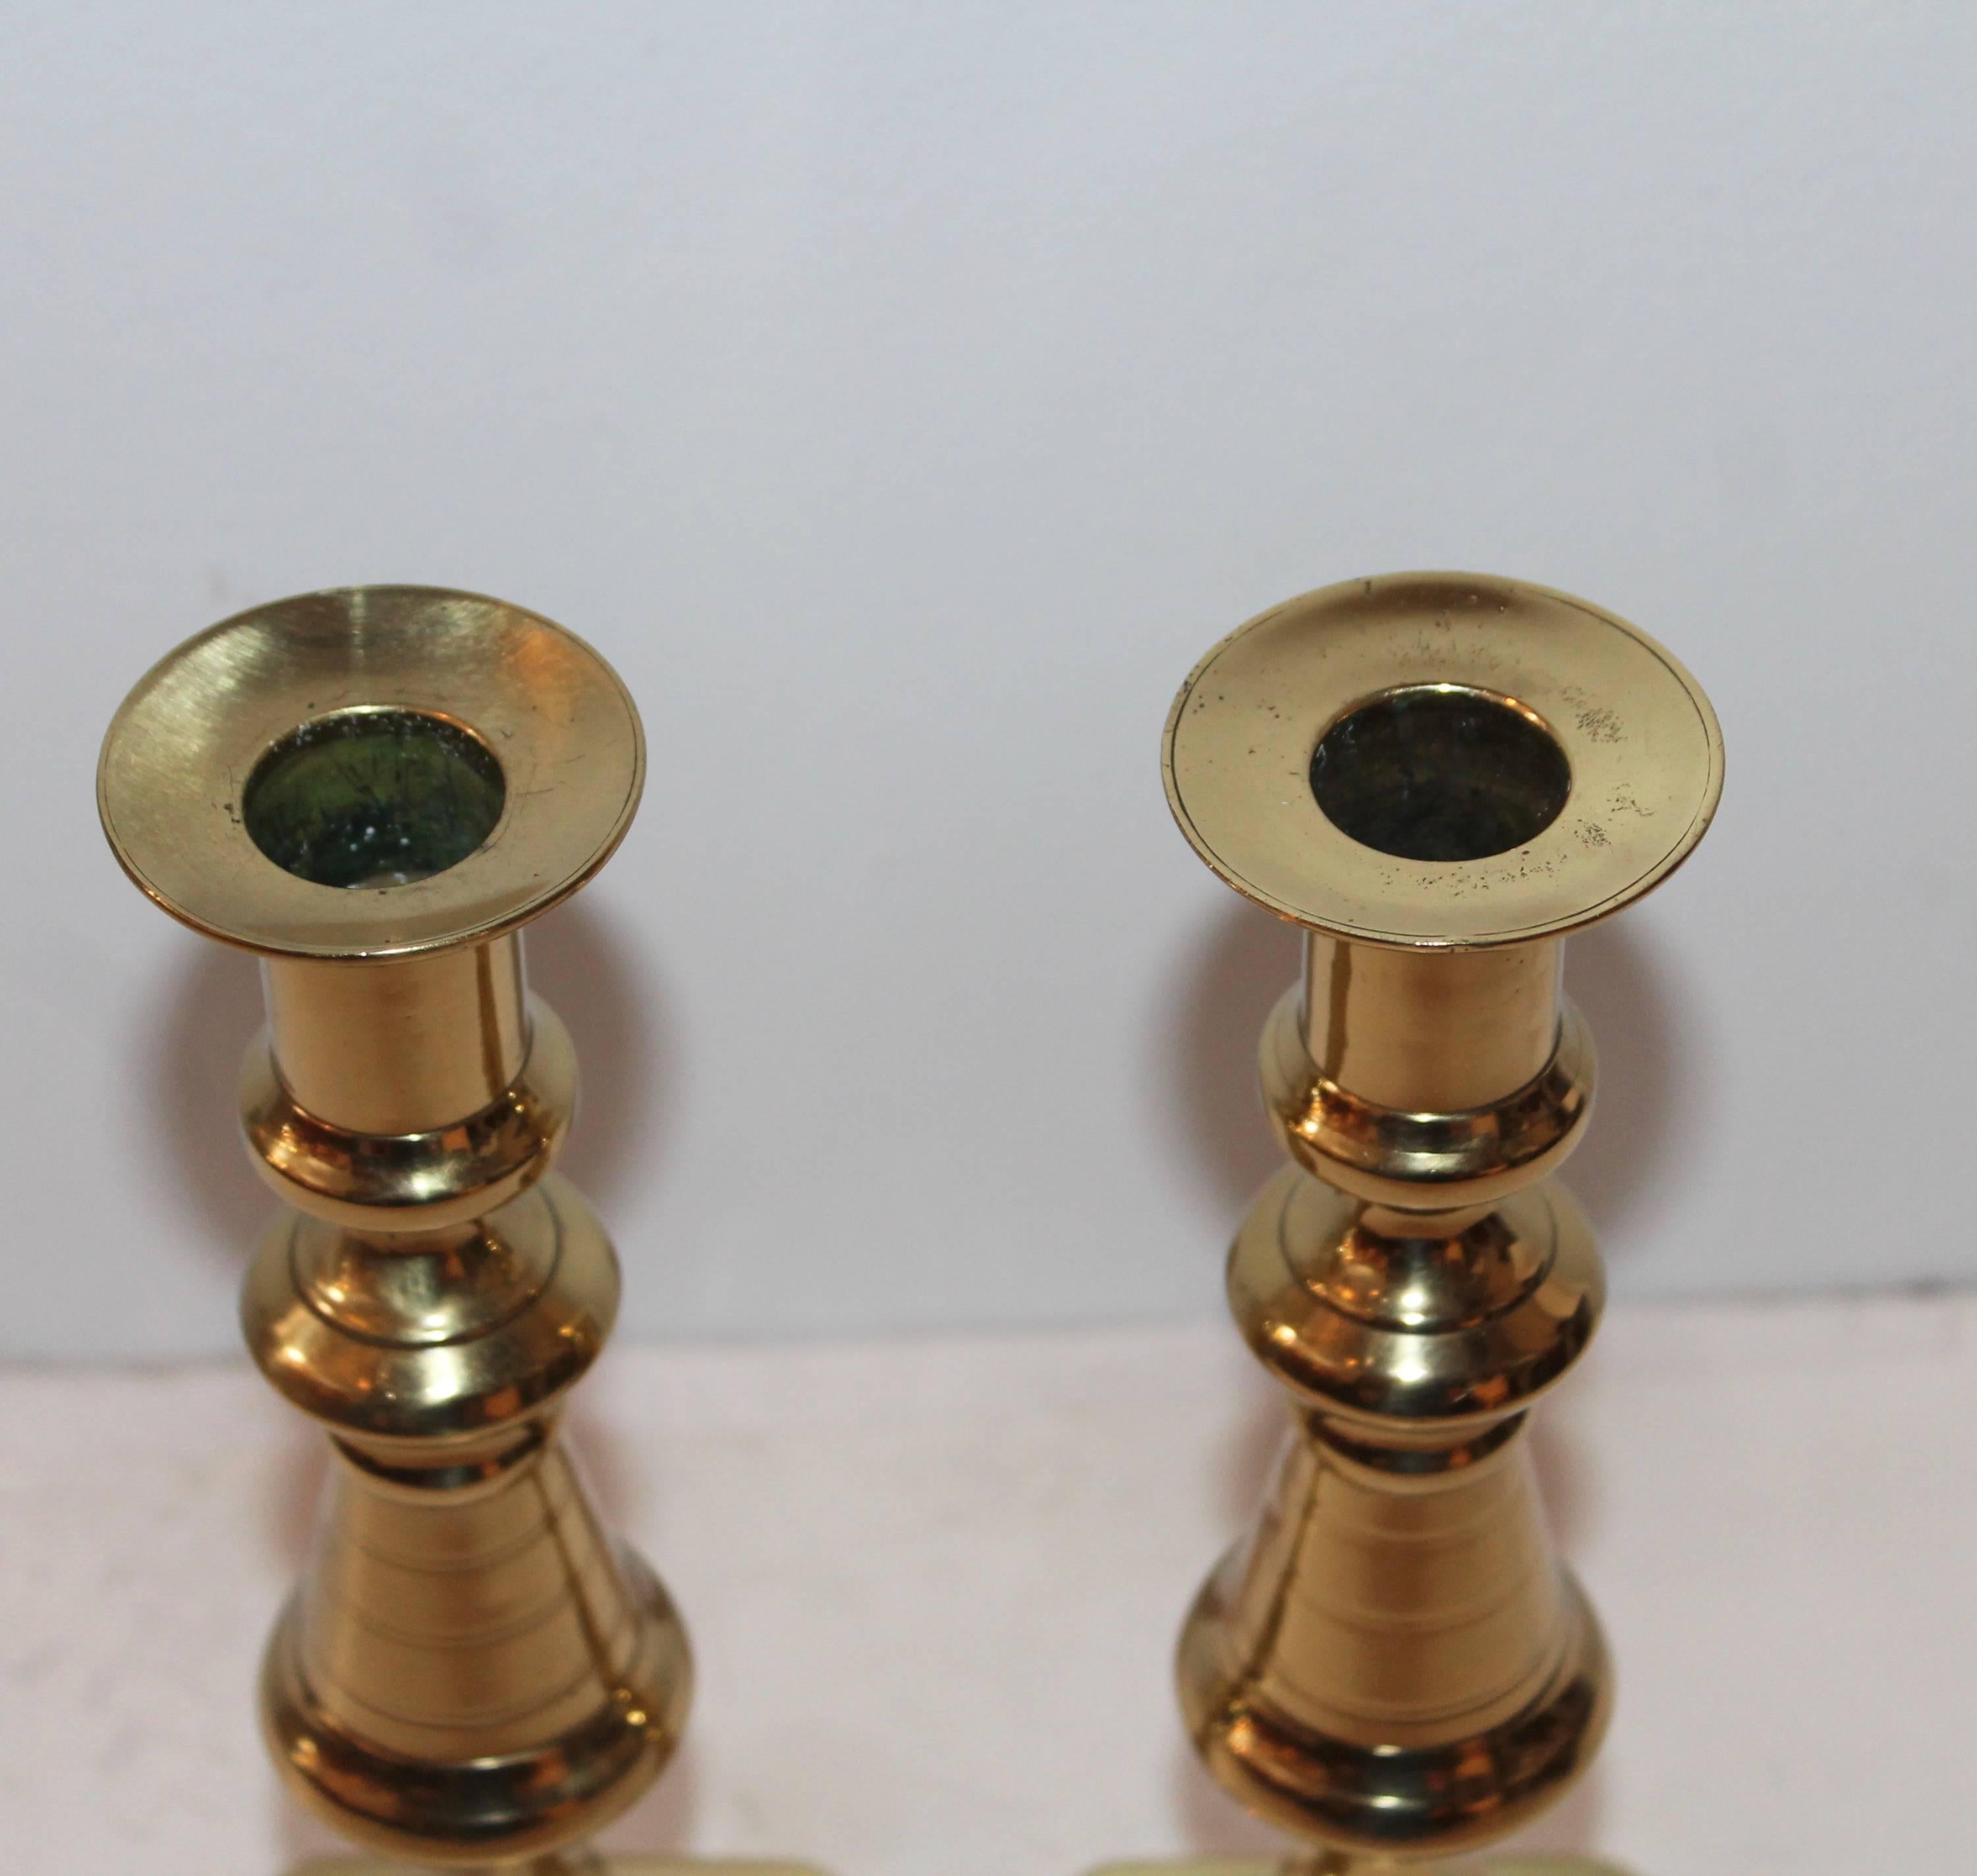 Pair of polished brass candlestick holders. This pair was found in New England and are in wonderful as found condition.